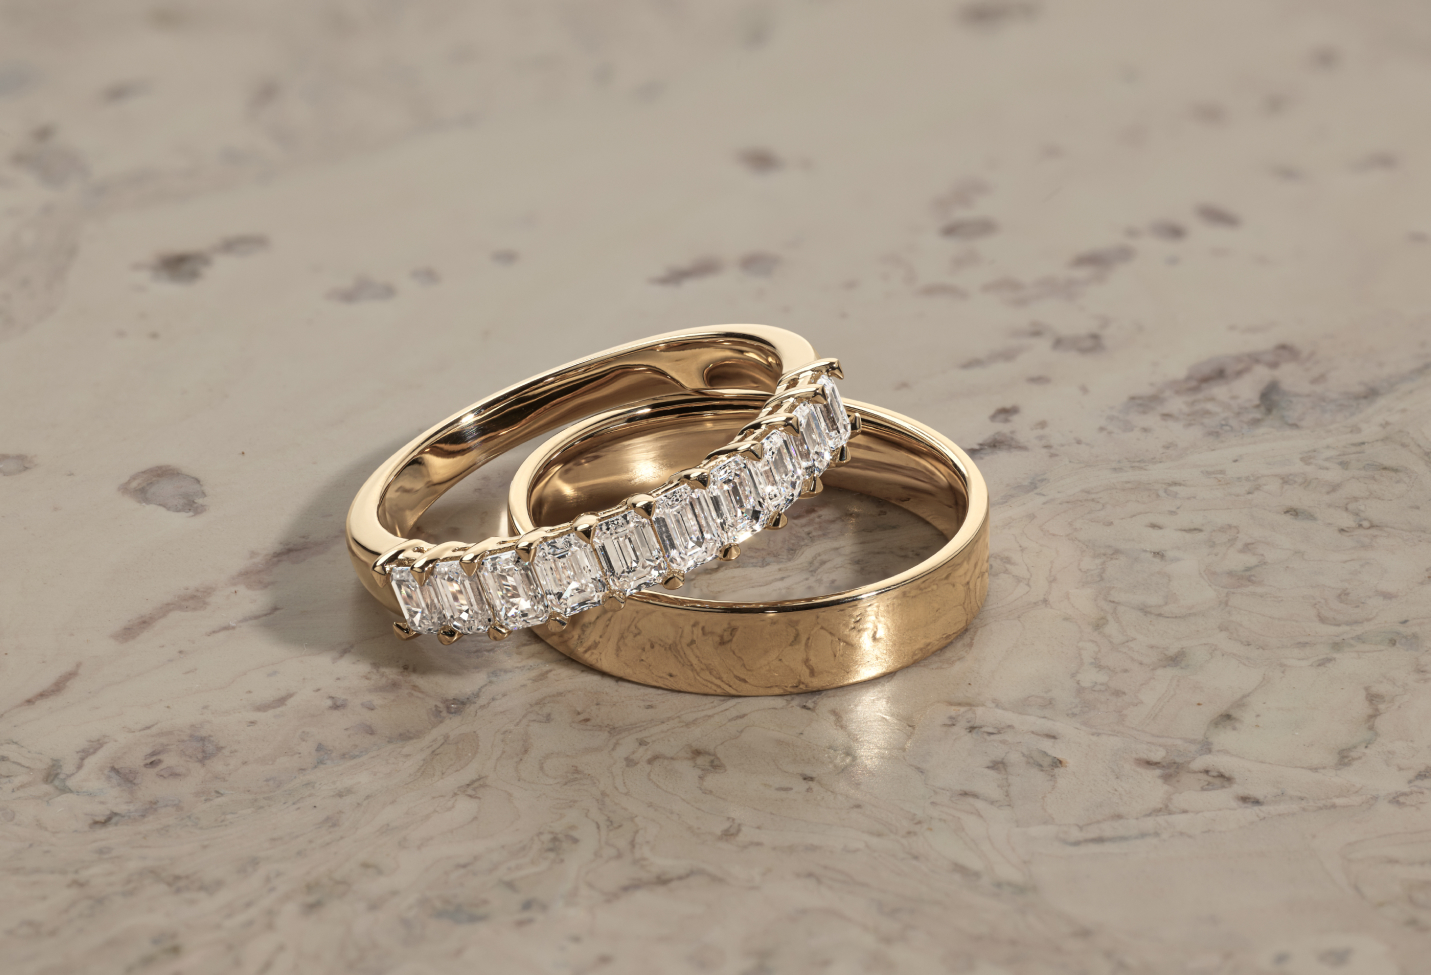  Image - Home Page - Wedding bands - 2UP